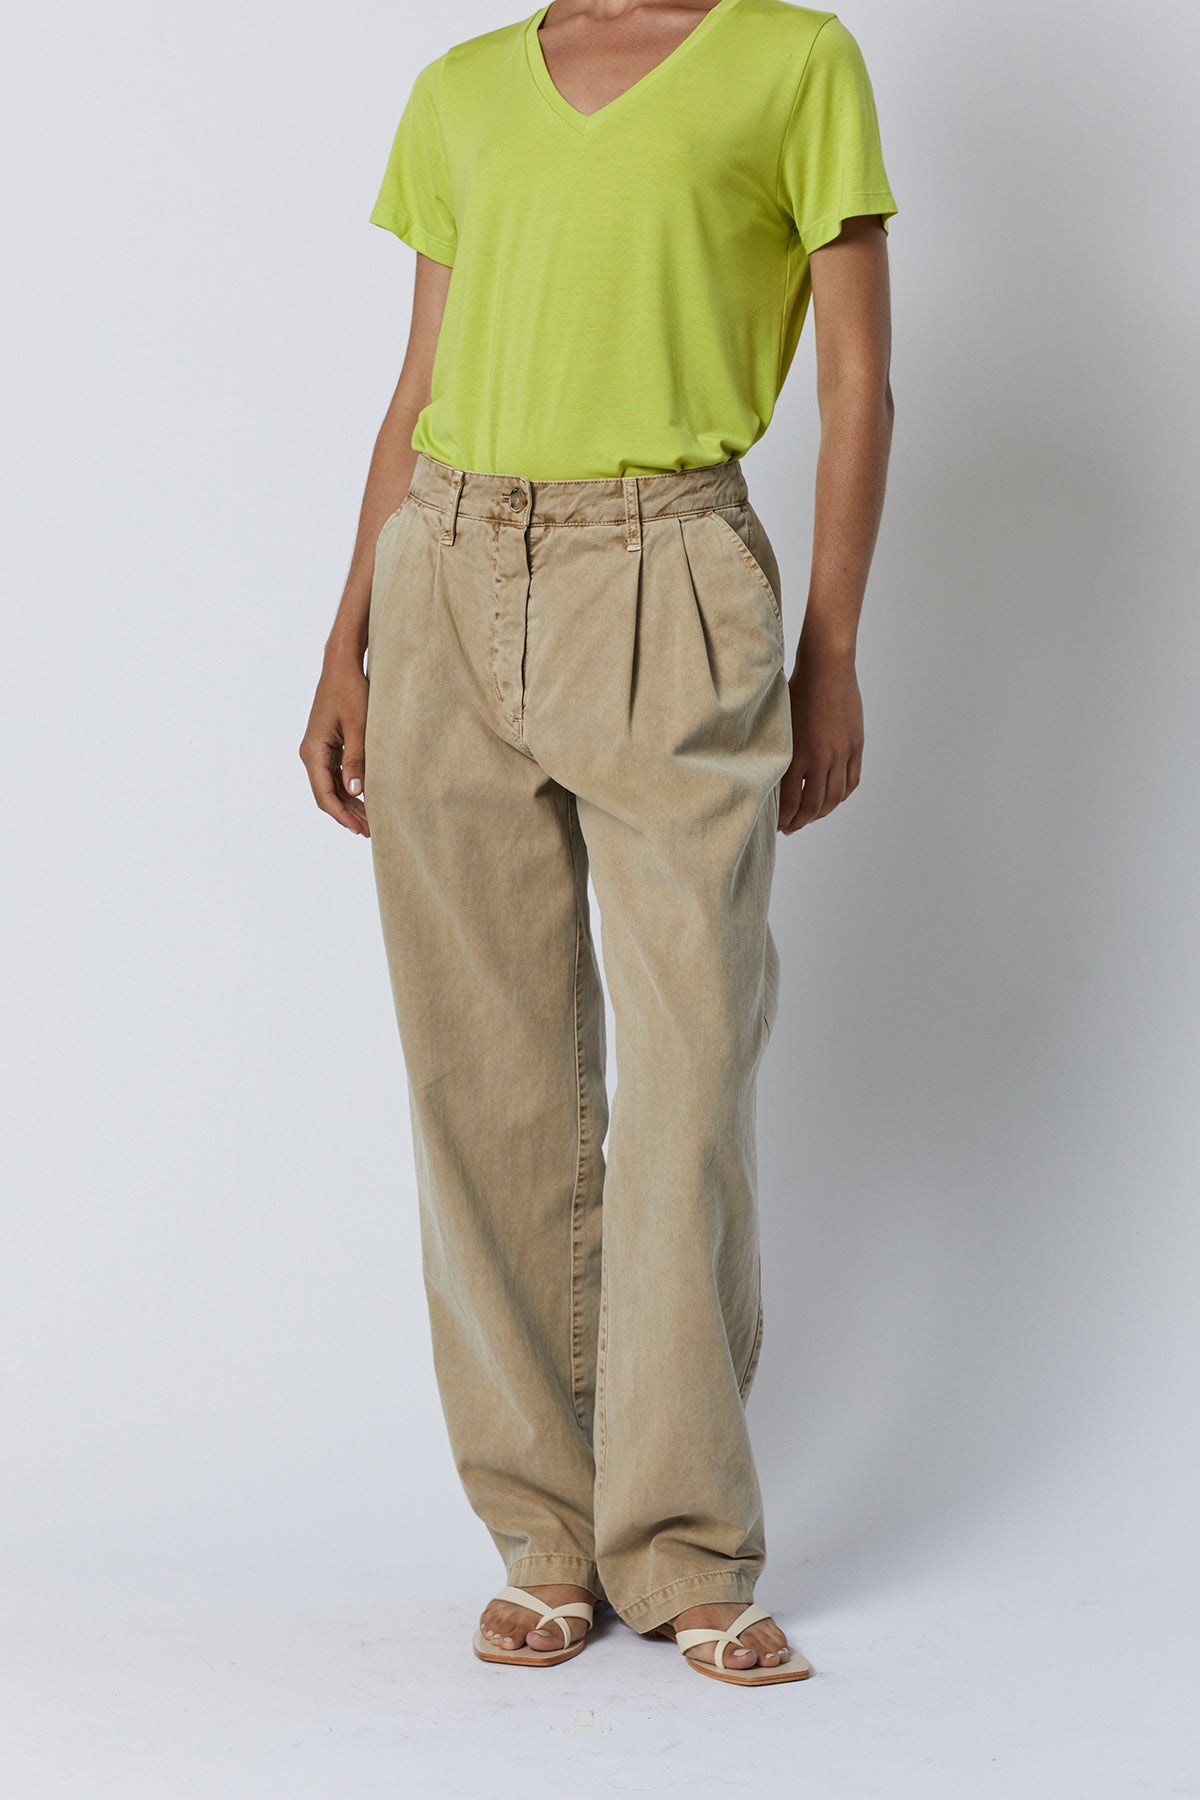 Temescal Pant in putty front-26007130538177